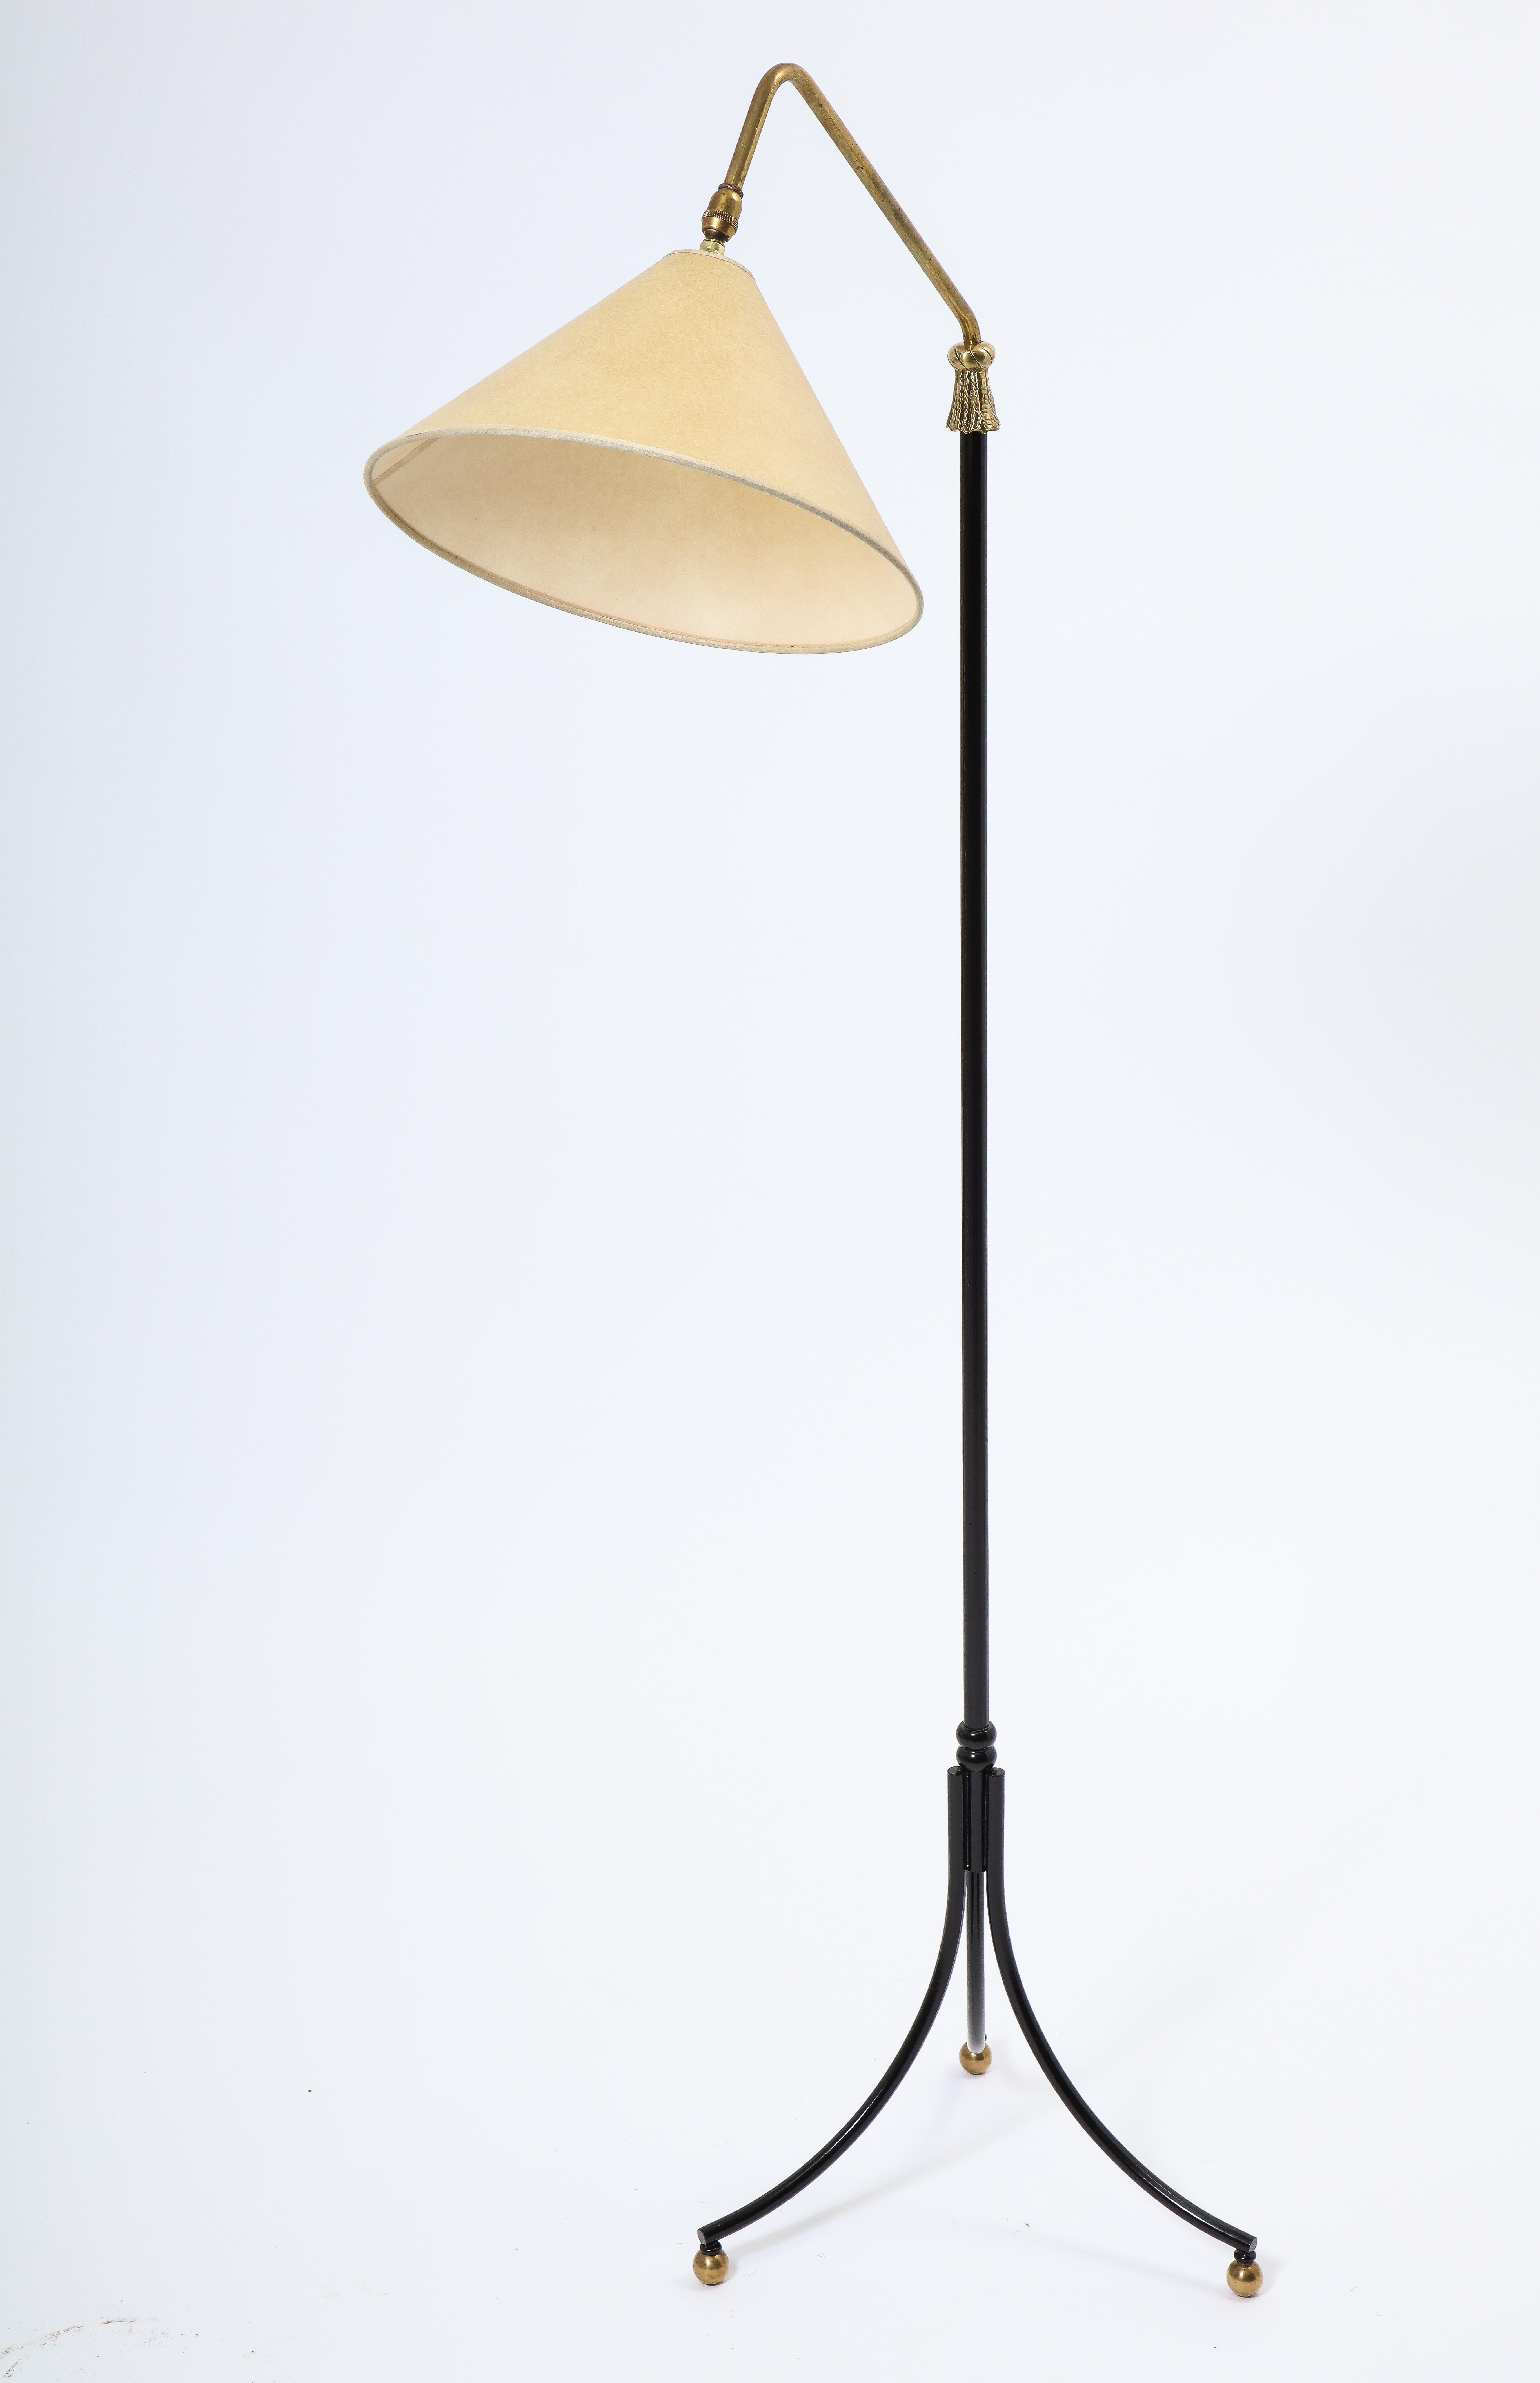 1950s French Arlus Iron and Brass Adjustable Floor Lamp 1